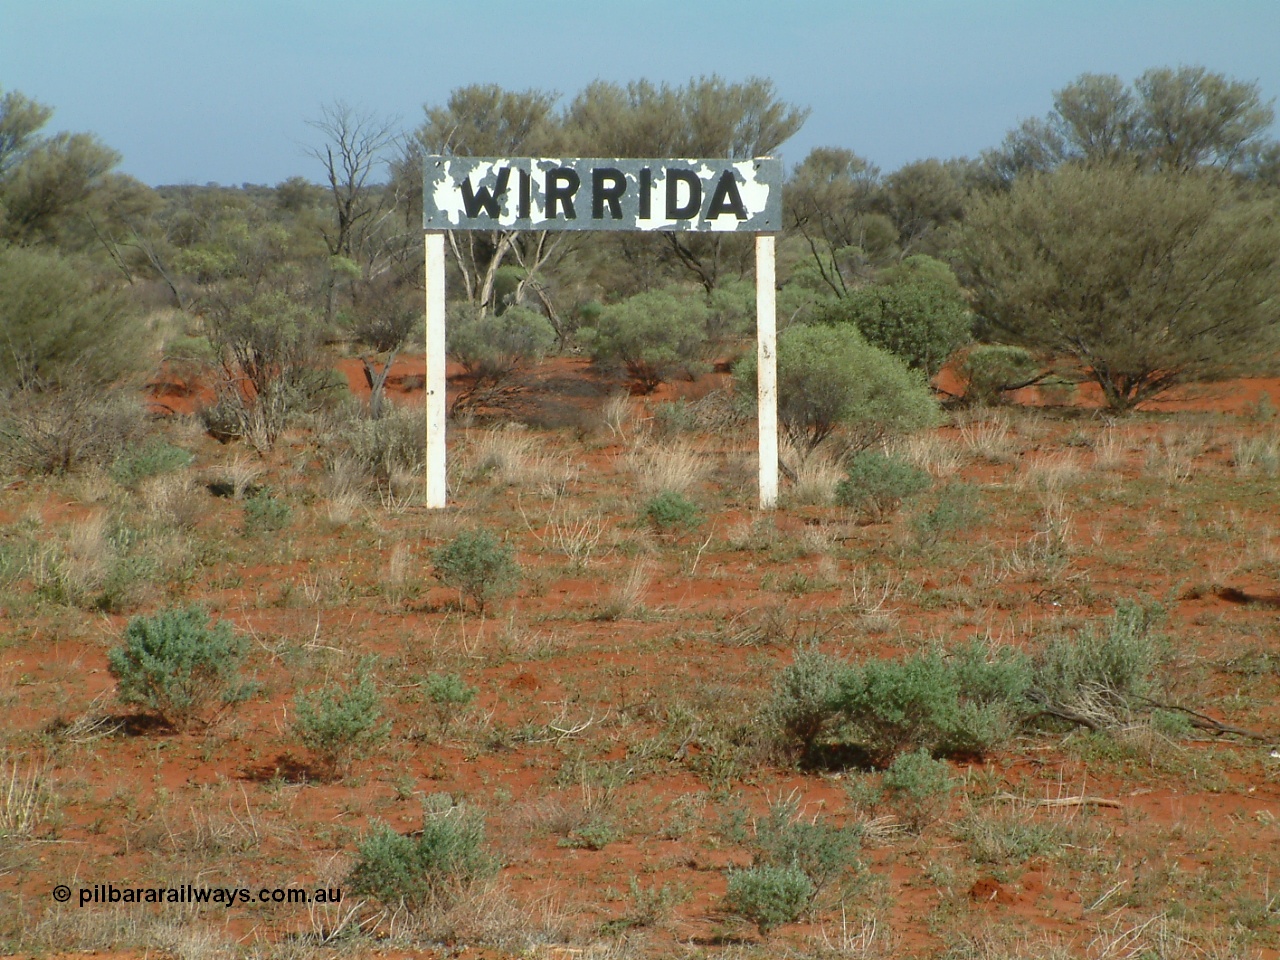 030416 095122
Wirrida Siding station nameboard. Located at the 641 km from the 0 datum at Coonamia and 137 km north of Tarcoola between Carnes and Manguri on the Tarcoola - Alice Springs line. [url=https://goo.gl/maps/zV1HEGVERomC6riq7]GeoData location[/url]. 16th April 2003.
